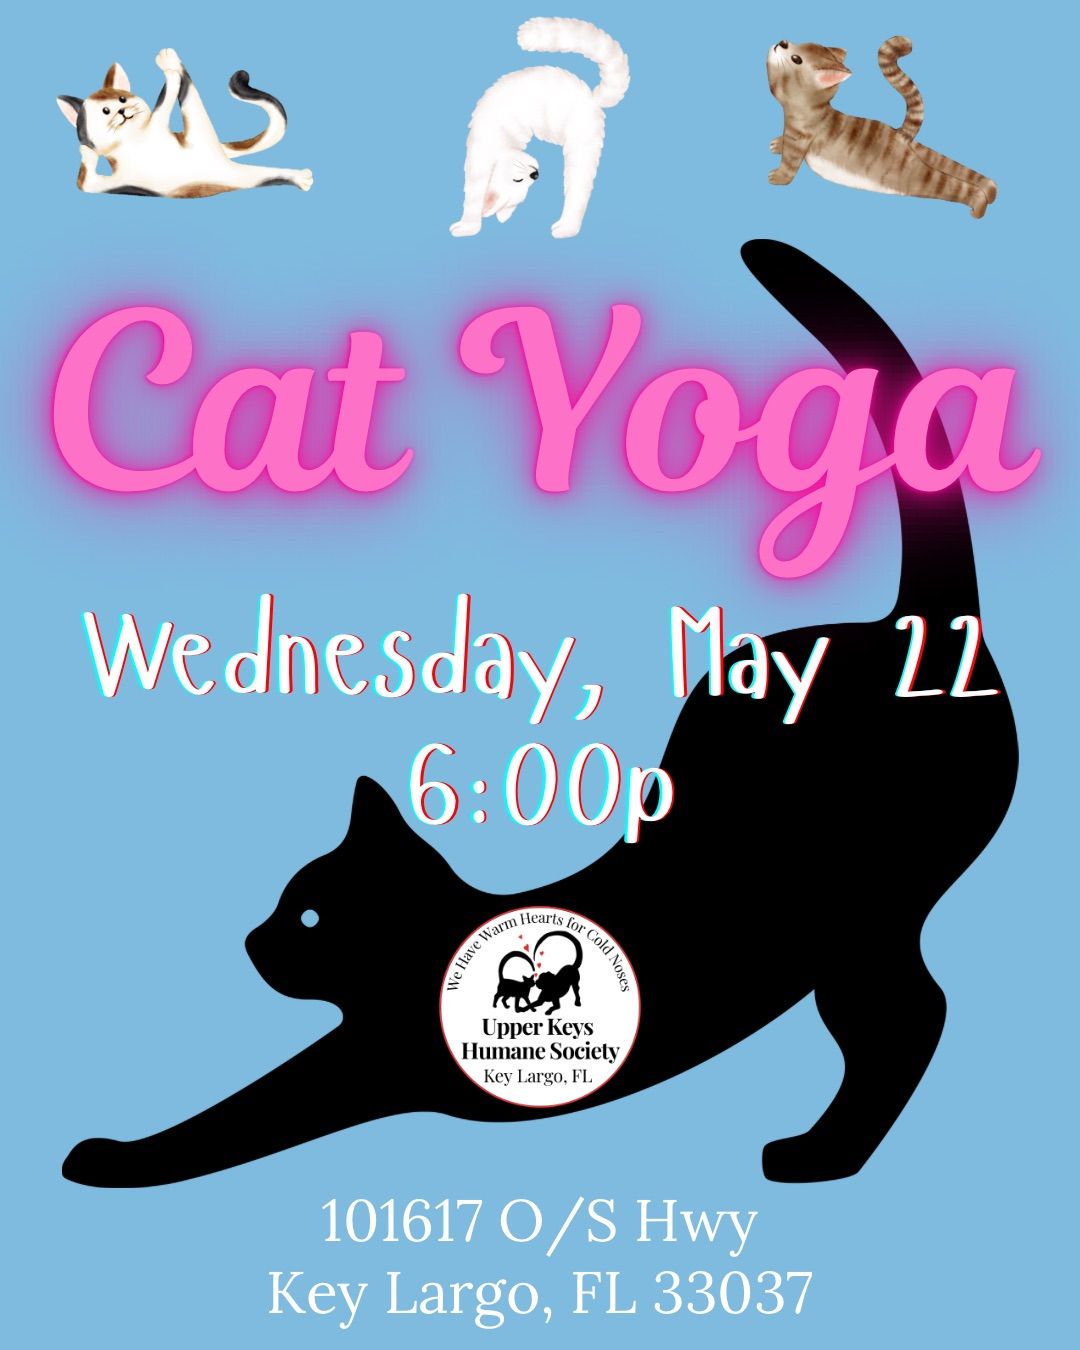 Cat Yoga with Damian & the UKHS zen masters!